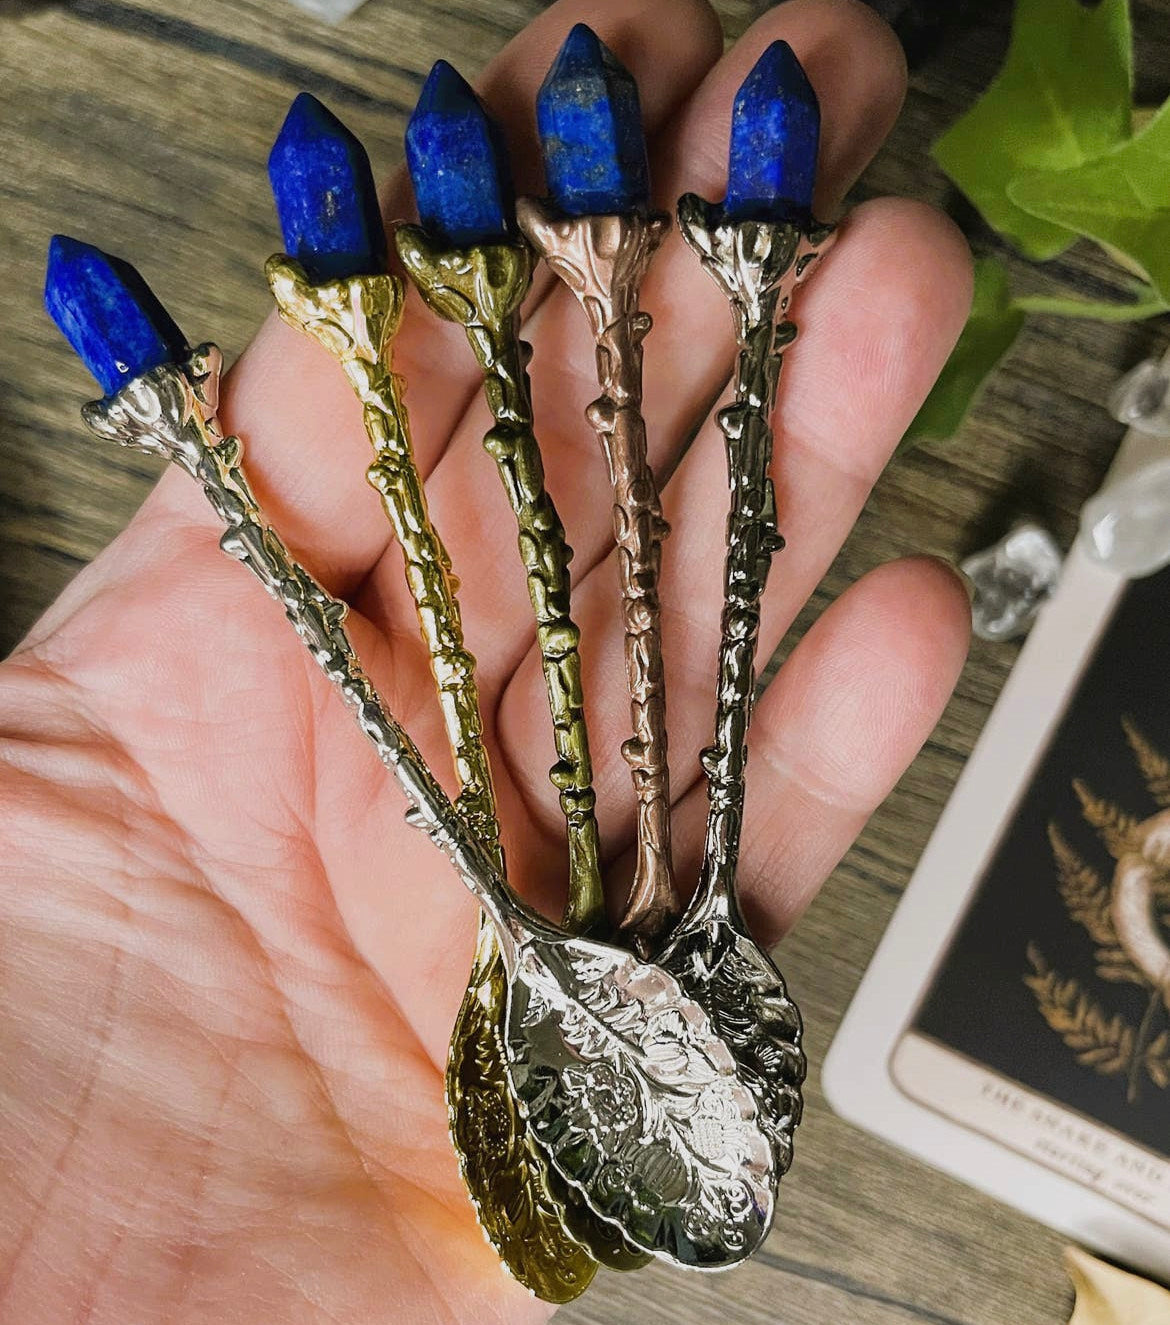 Lapis Crystal Herb Spoon, Witchcraft Apothecary Supplies